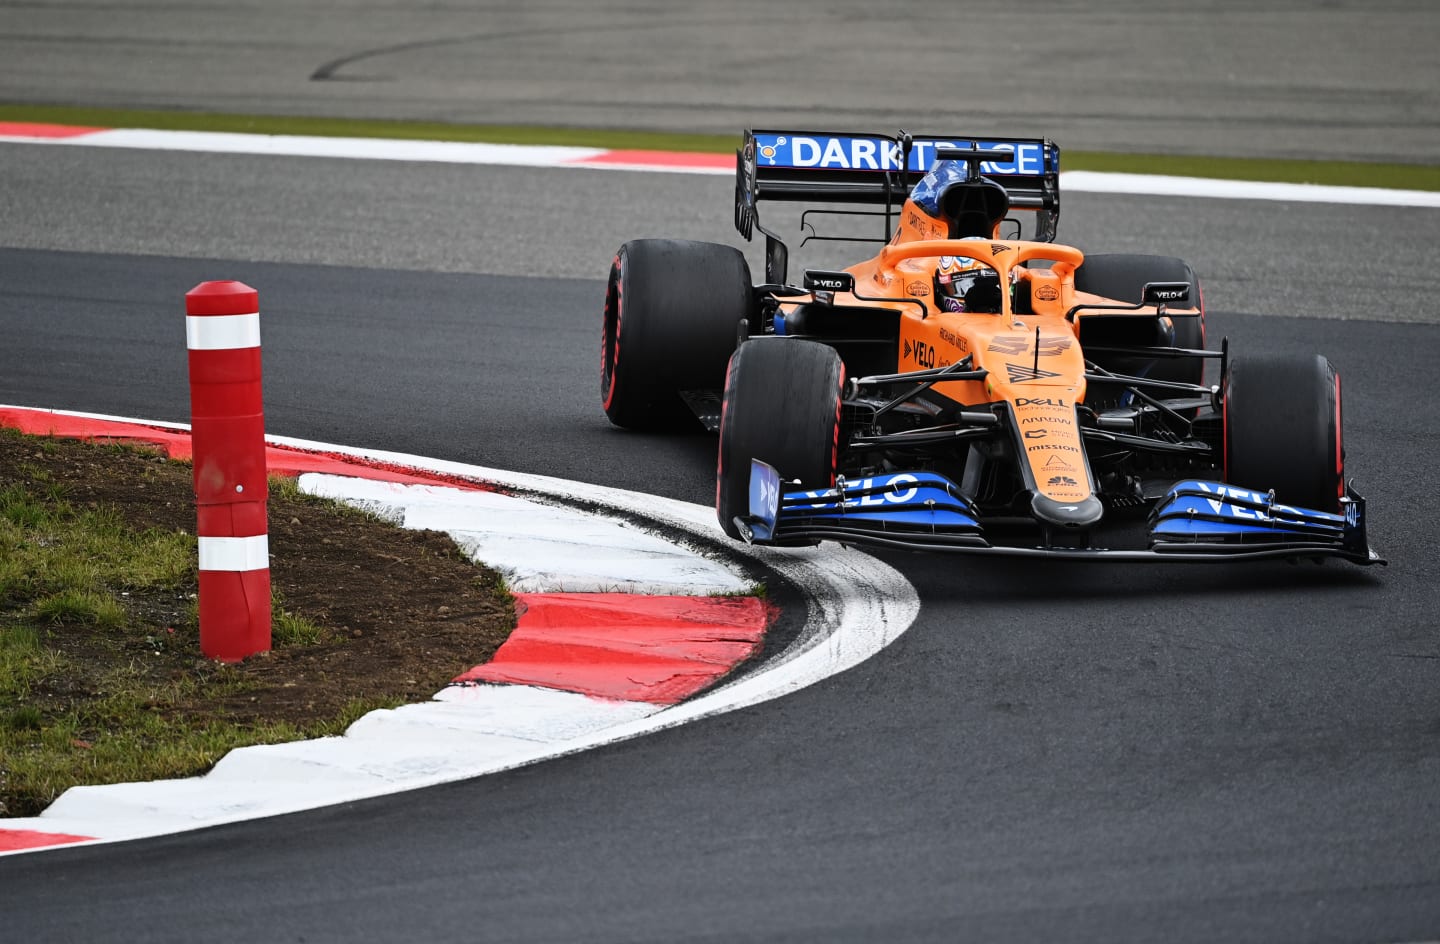 NUERBURG, GERMANY - OCTOBER 11: Carlos Sainz of Spain driving the (55) McLaren F1 Team MCL35 Renault on track during the F1 Eifel Grand Prix at Nuerburgring on October 11, 2020 in Nuerburg, Germany. (Photo by Ina Fassbender - Pool/Getty Images)